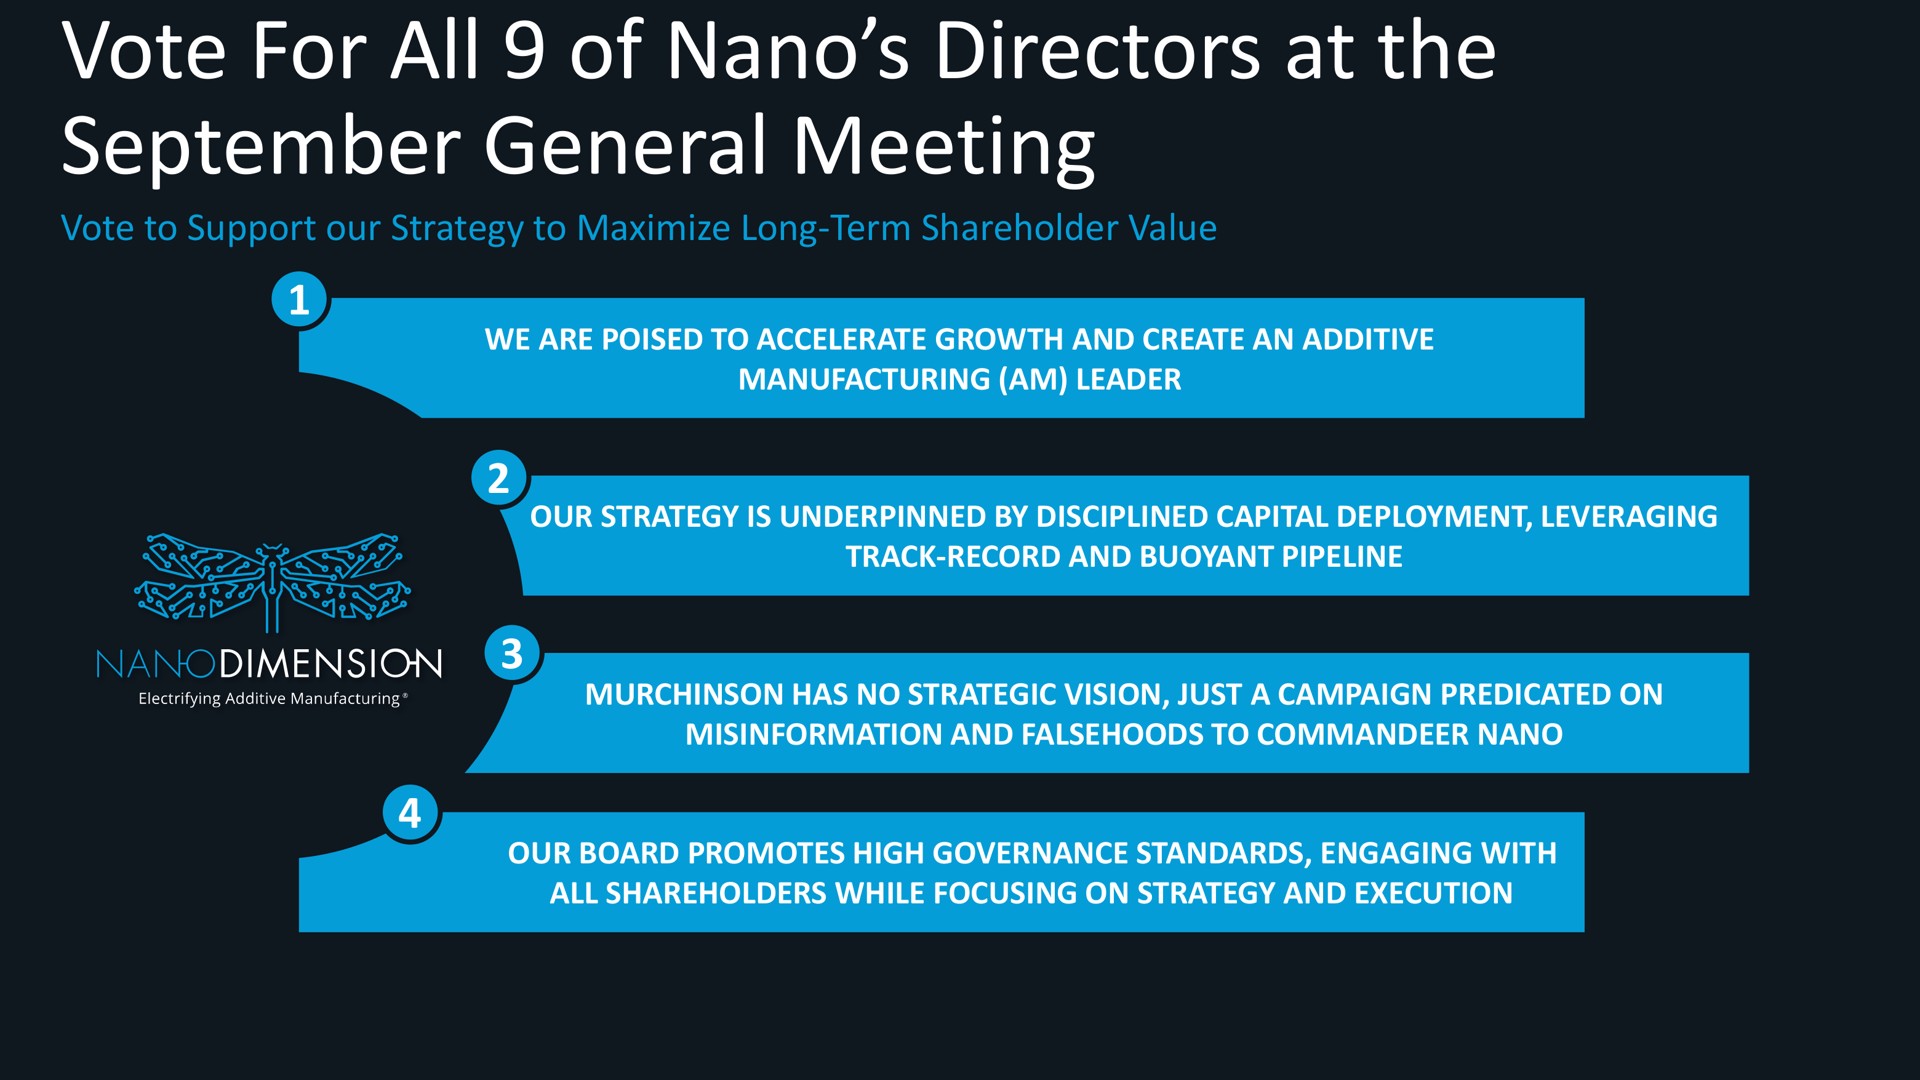 vote for all of directors at the general meeting | Nano Dimension